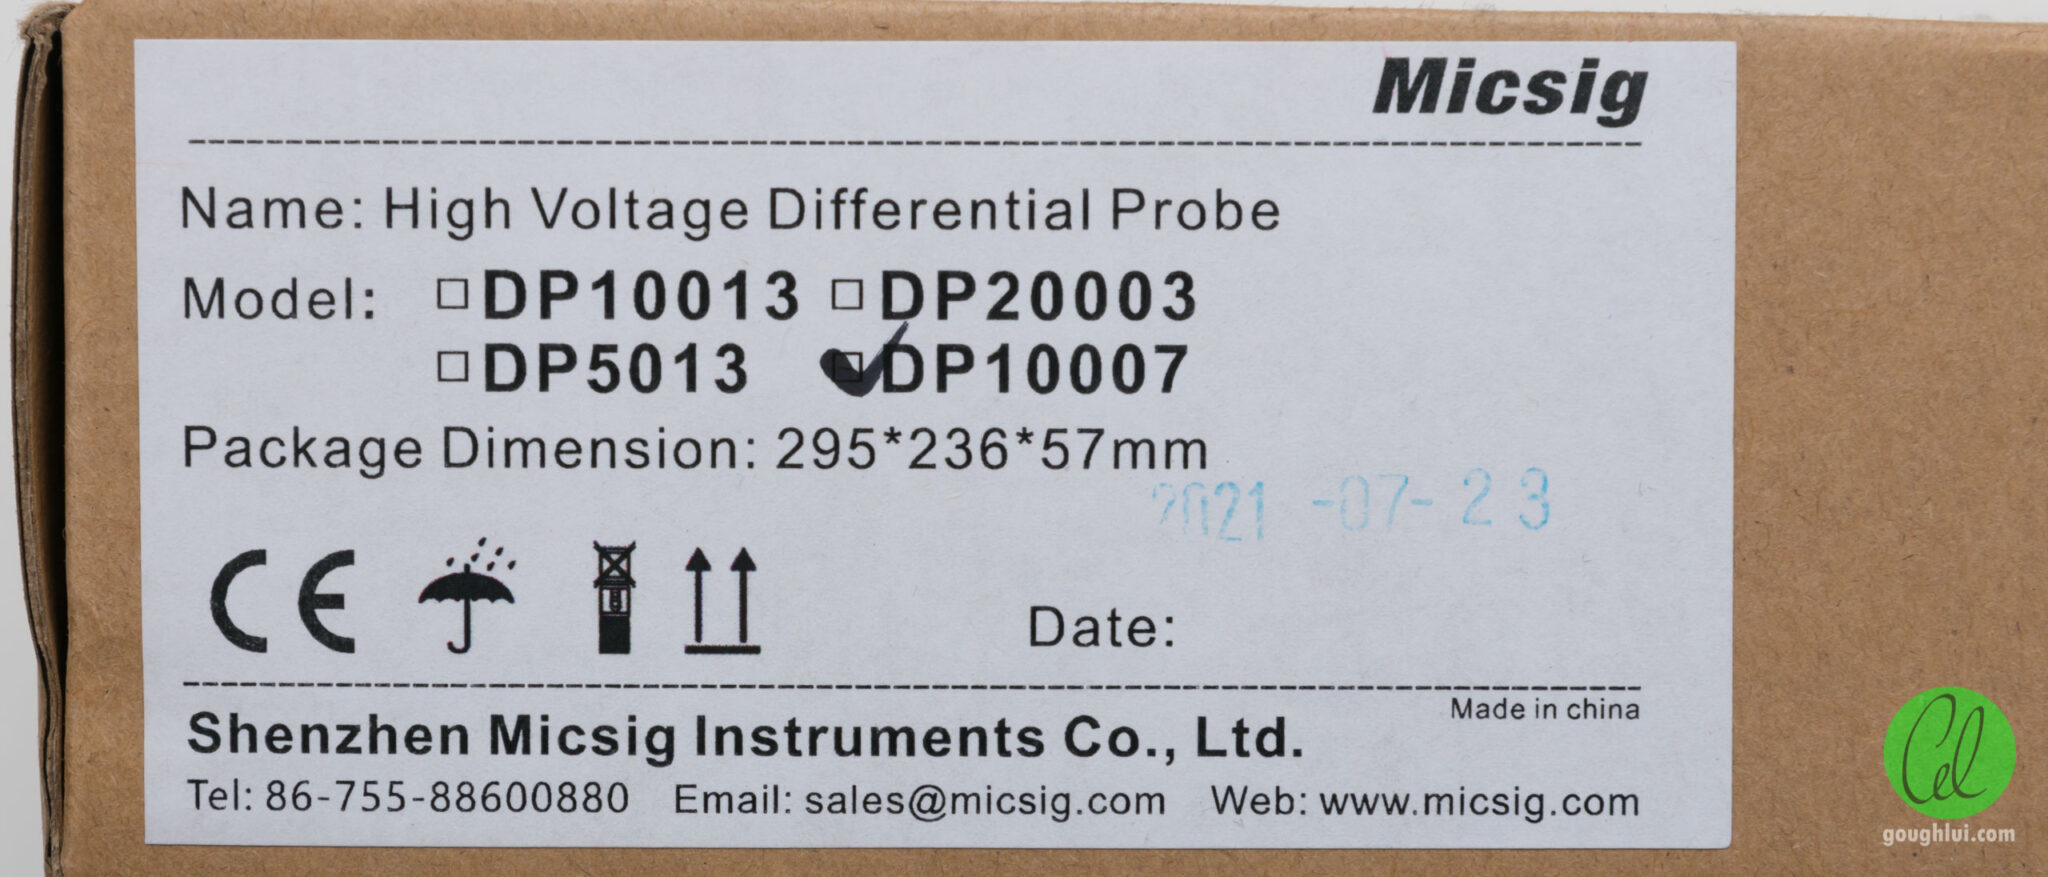 Review: Micsig DP10007 (700V,100MHz,10/100x) High Voltage Differential Probe